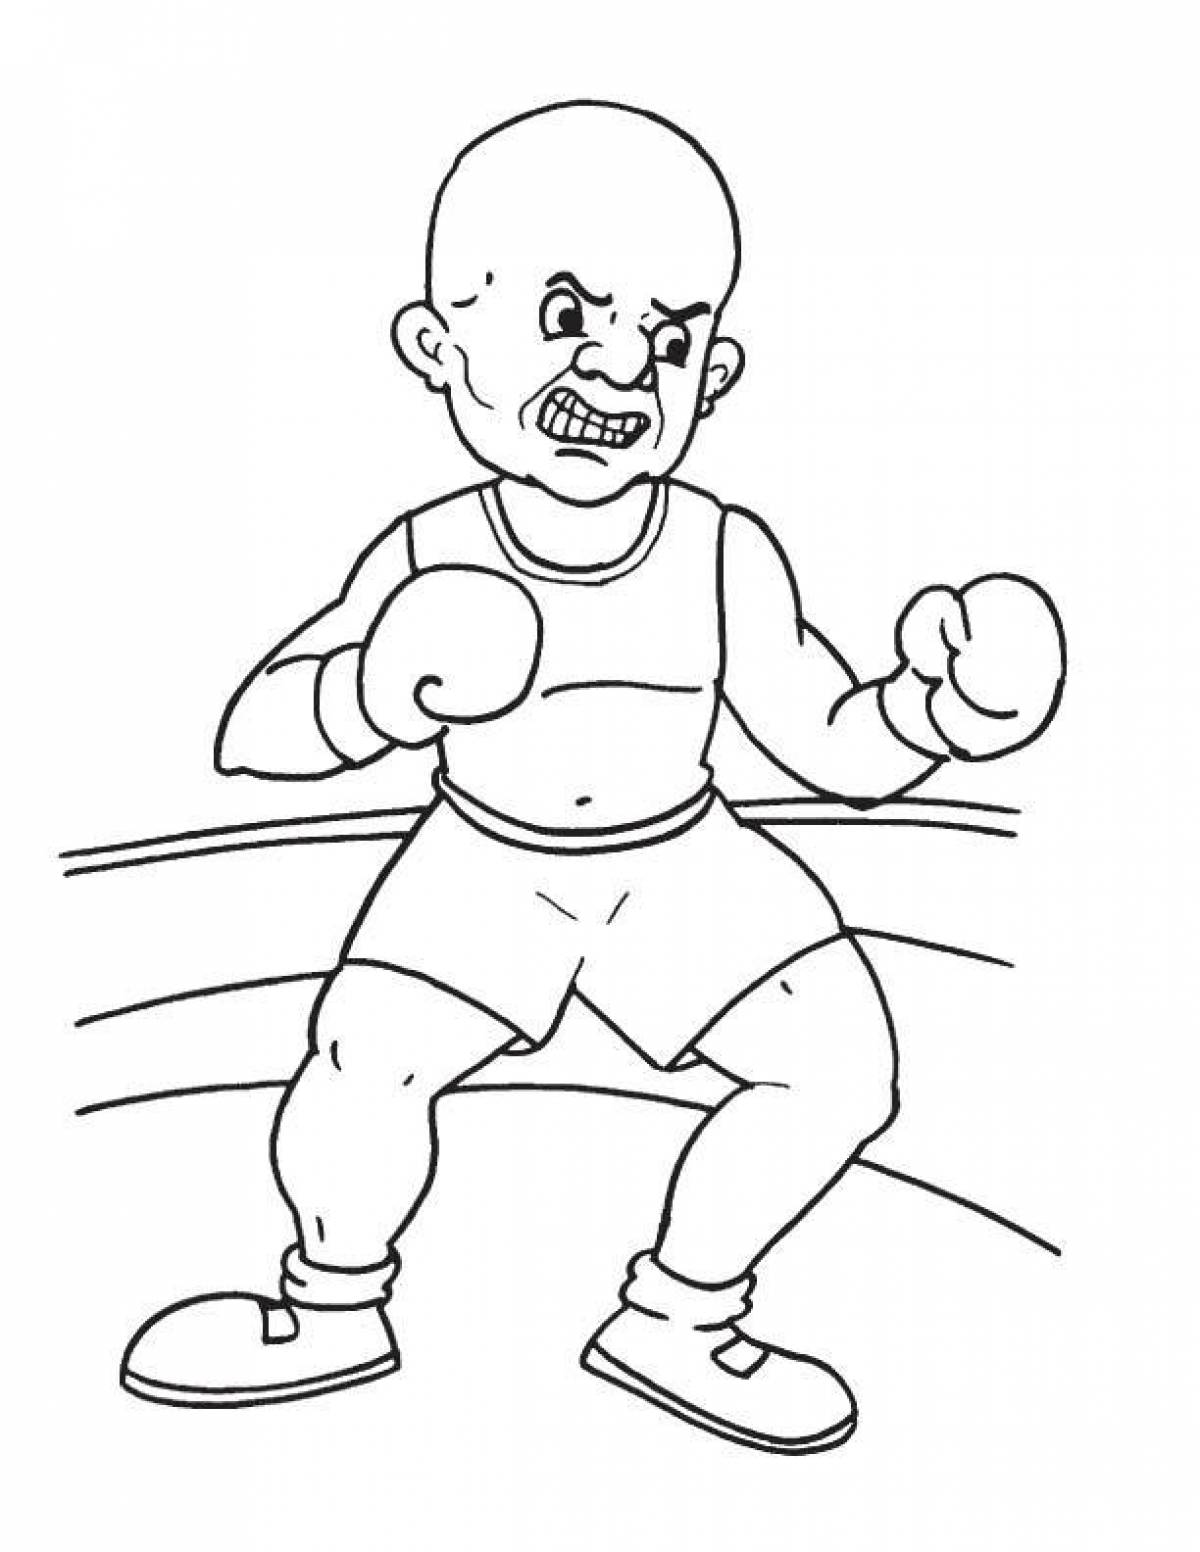 Intriguing boxing and boo coloring page